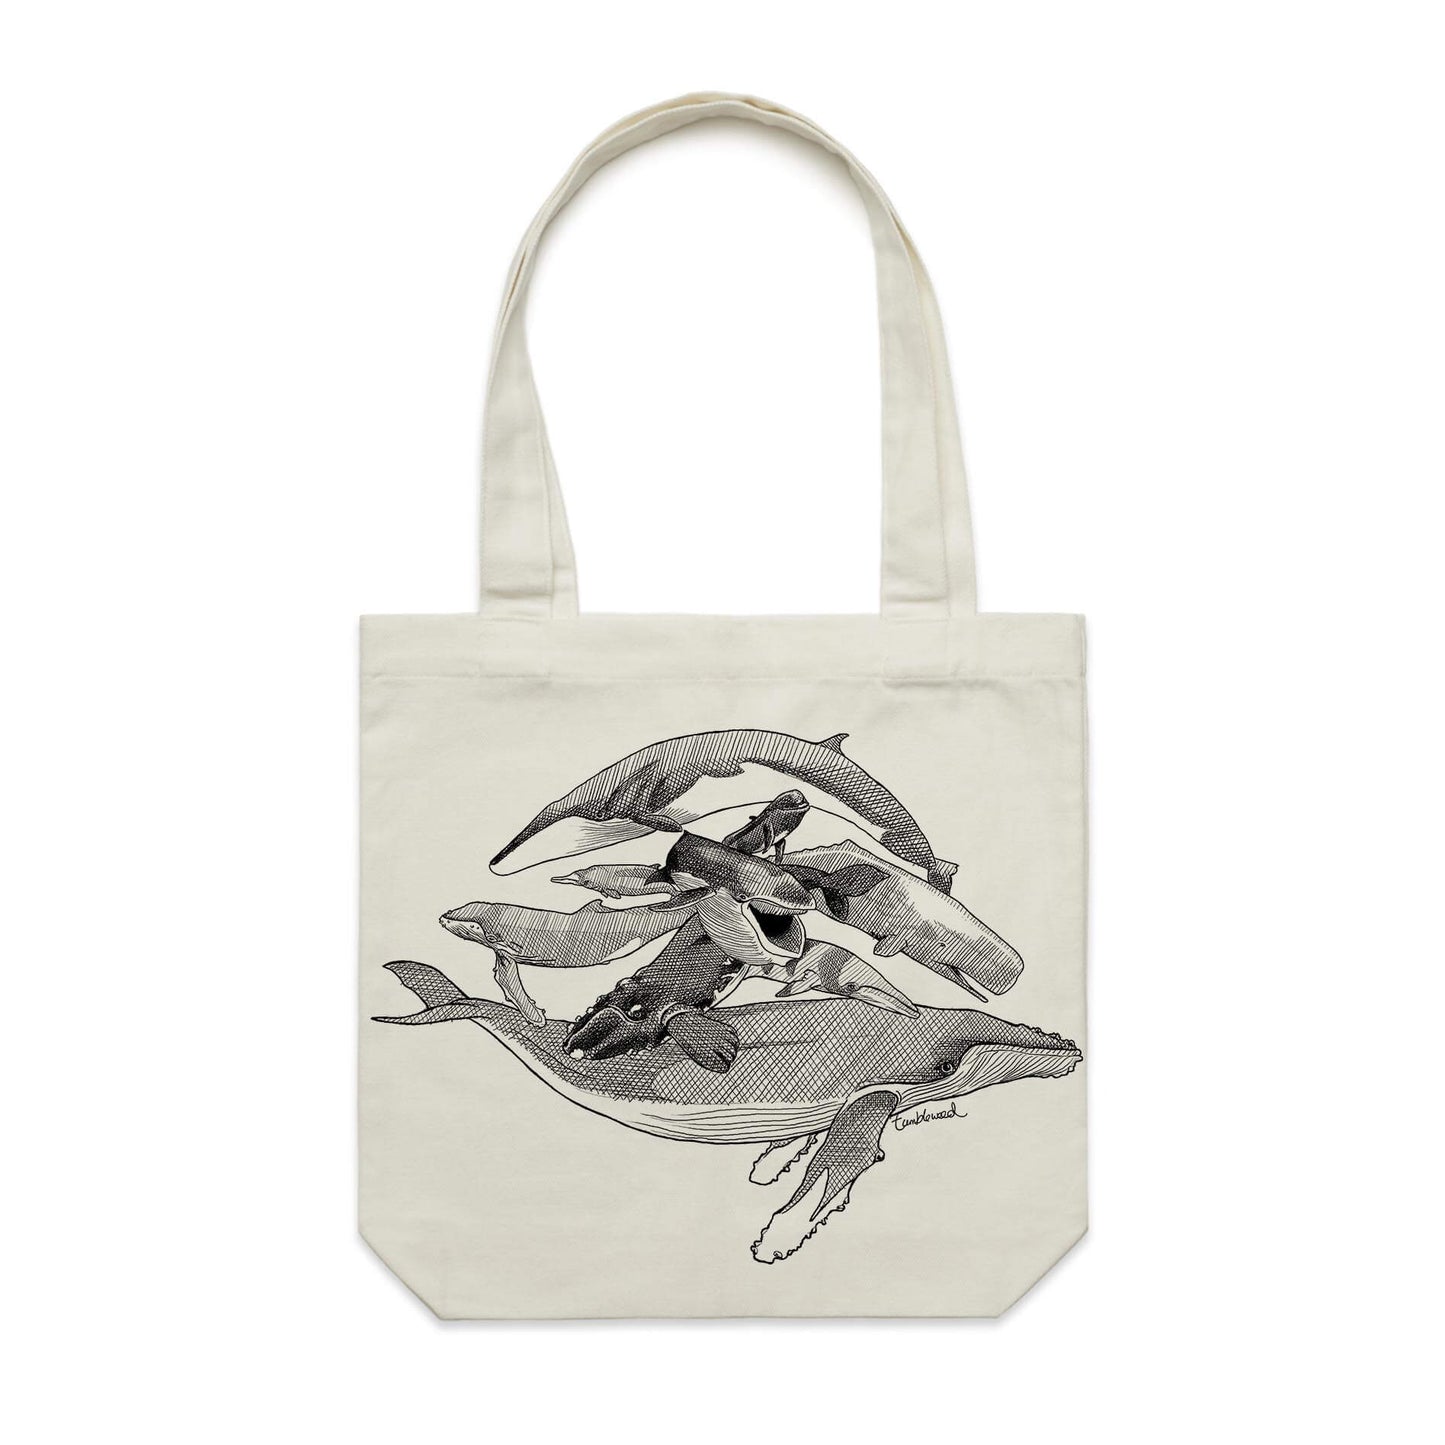 Cotton canvas tote bag with a screen printed Whales design.